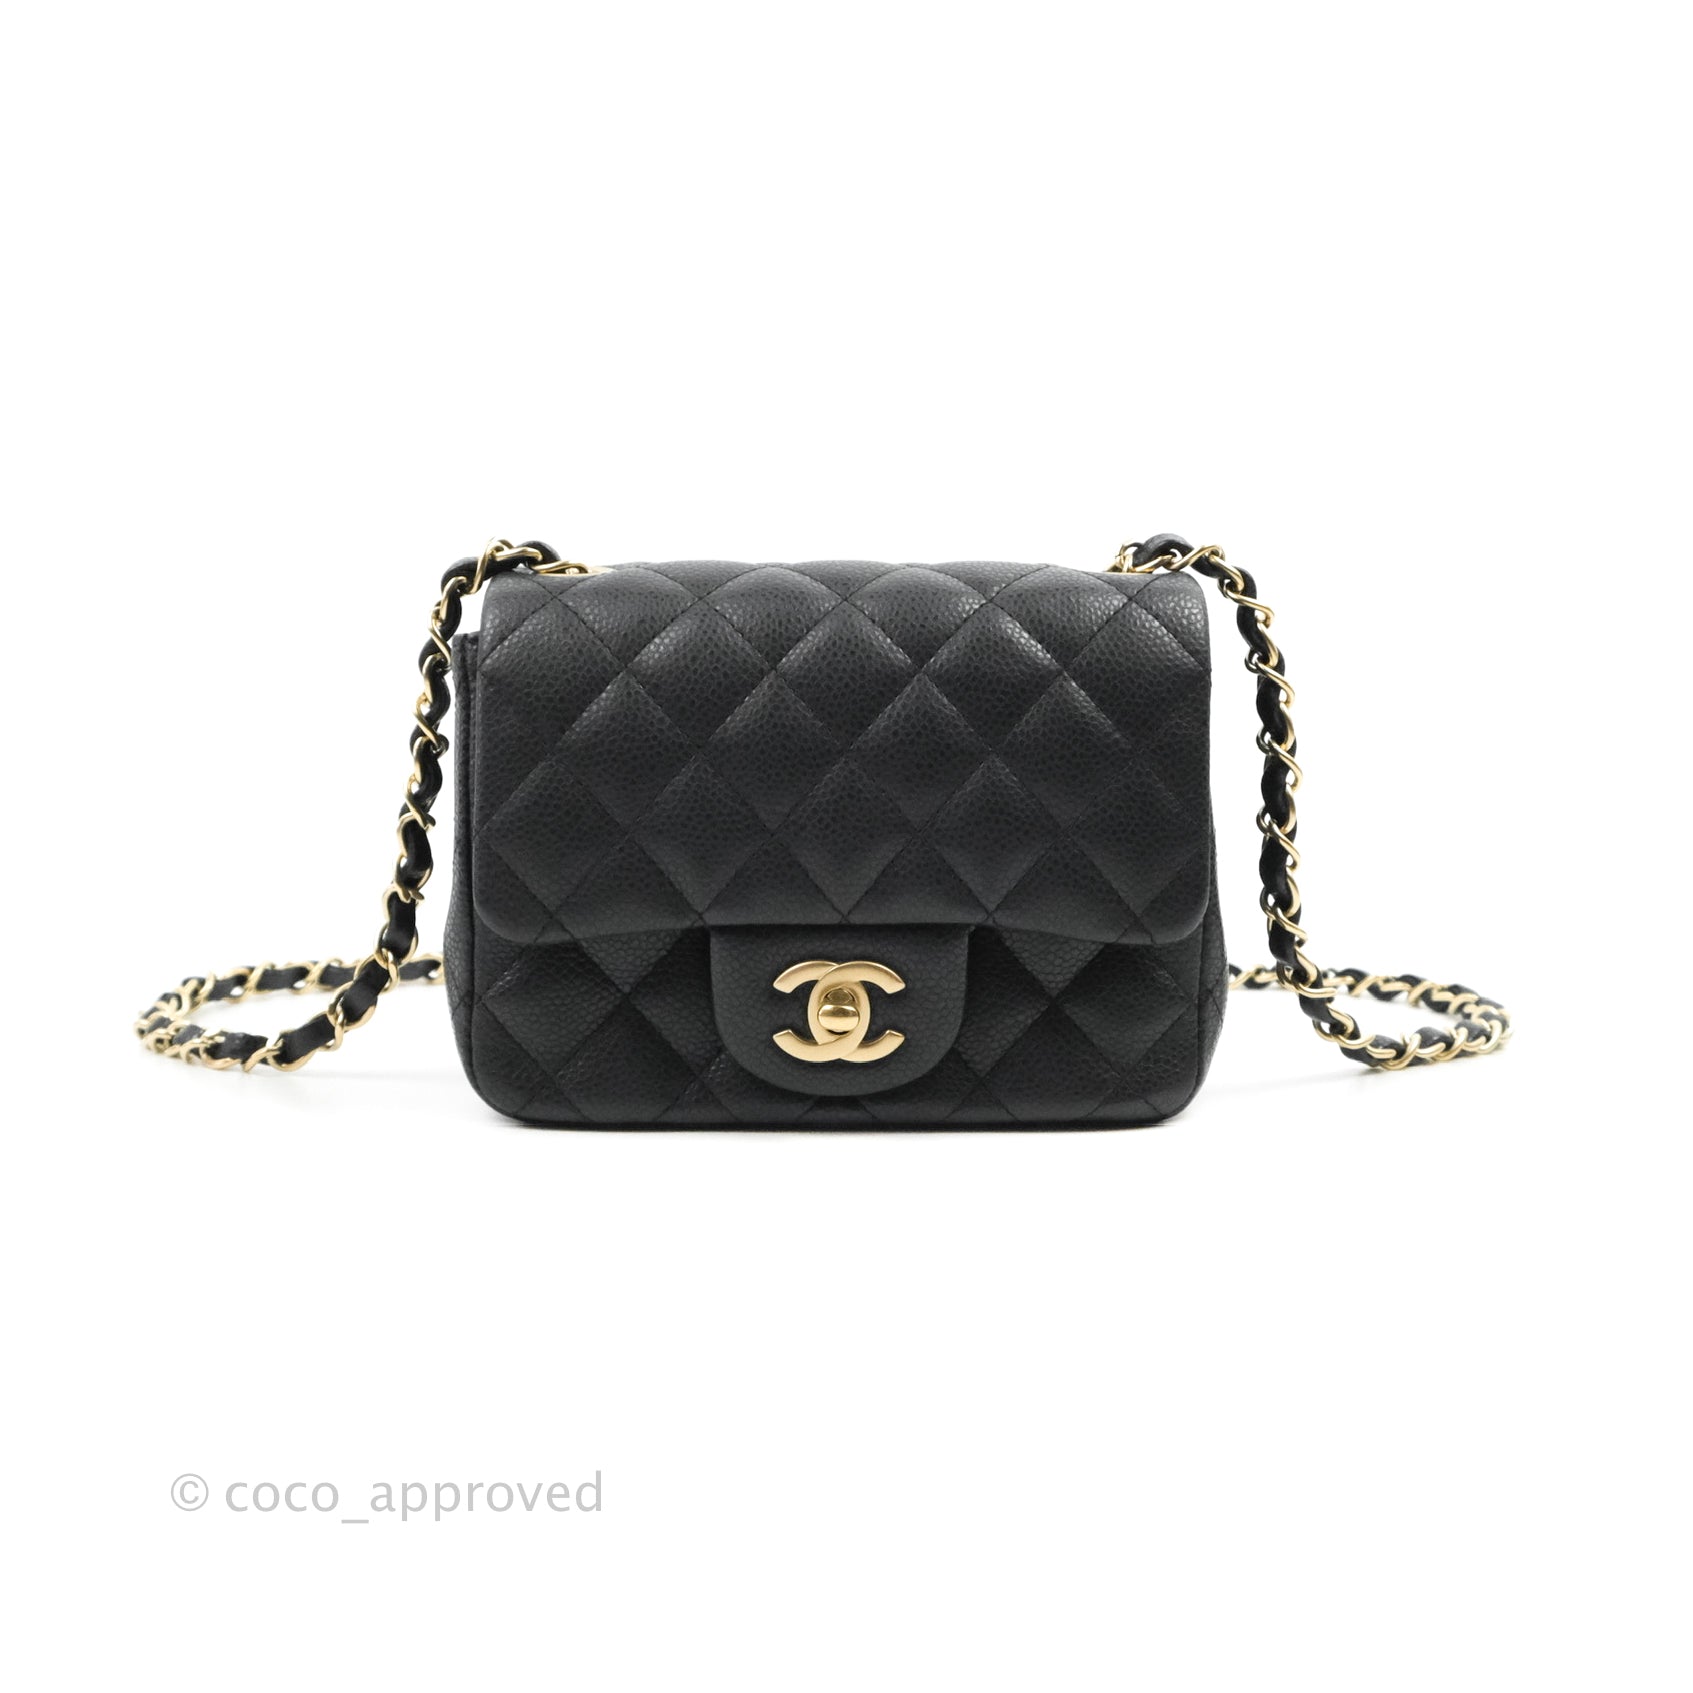 Chanel Iridescent Purple Caviar Quilted Mini Flap Bag